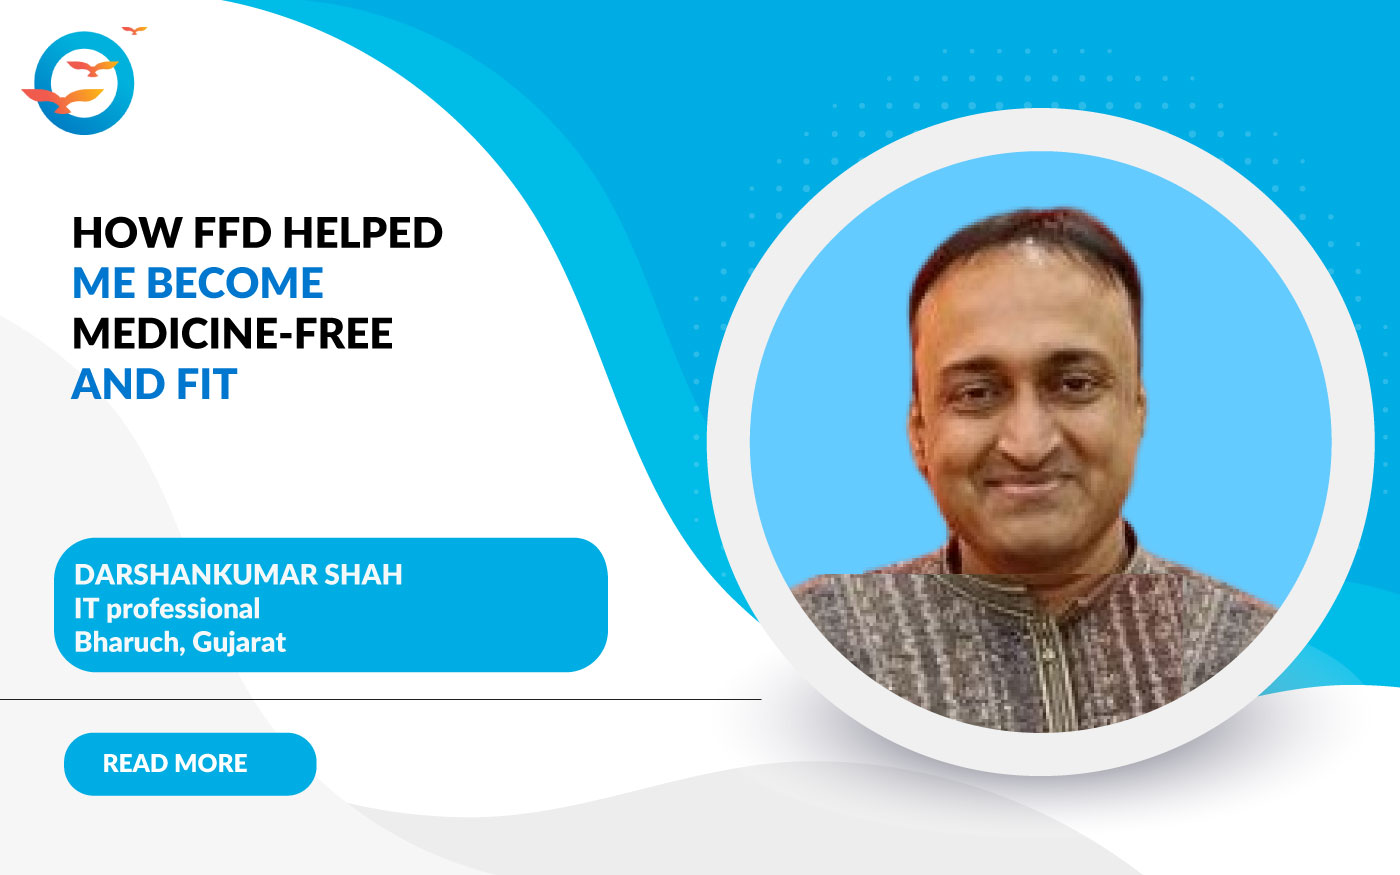 How FFD Helped Me Become Medicine-Free and Fit - Darshankumar Shah